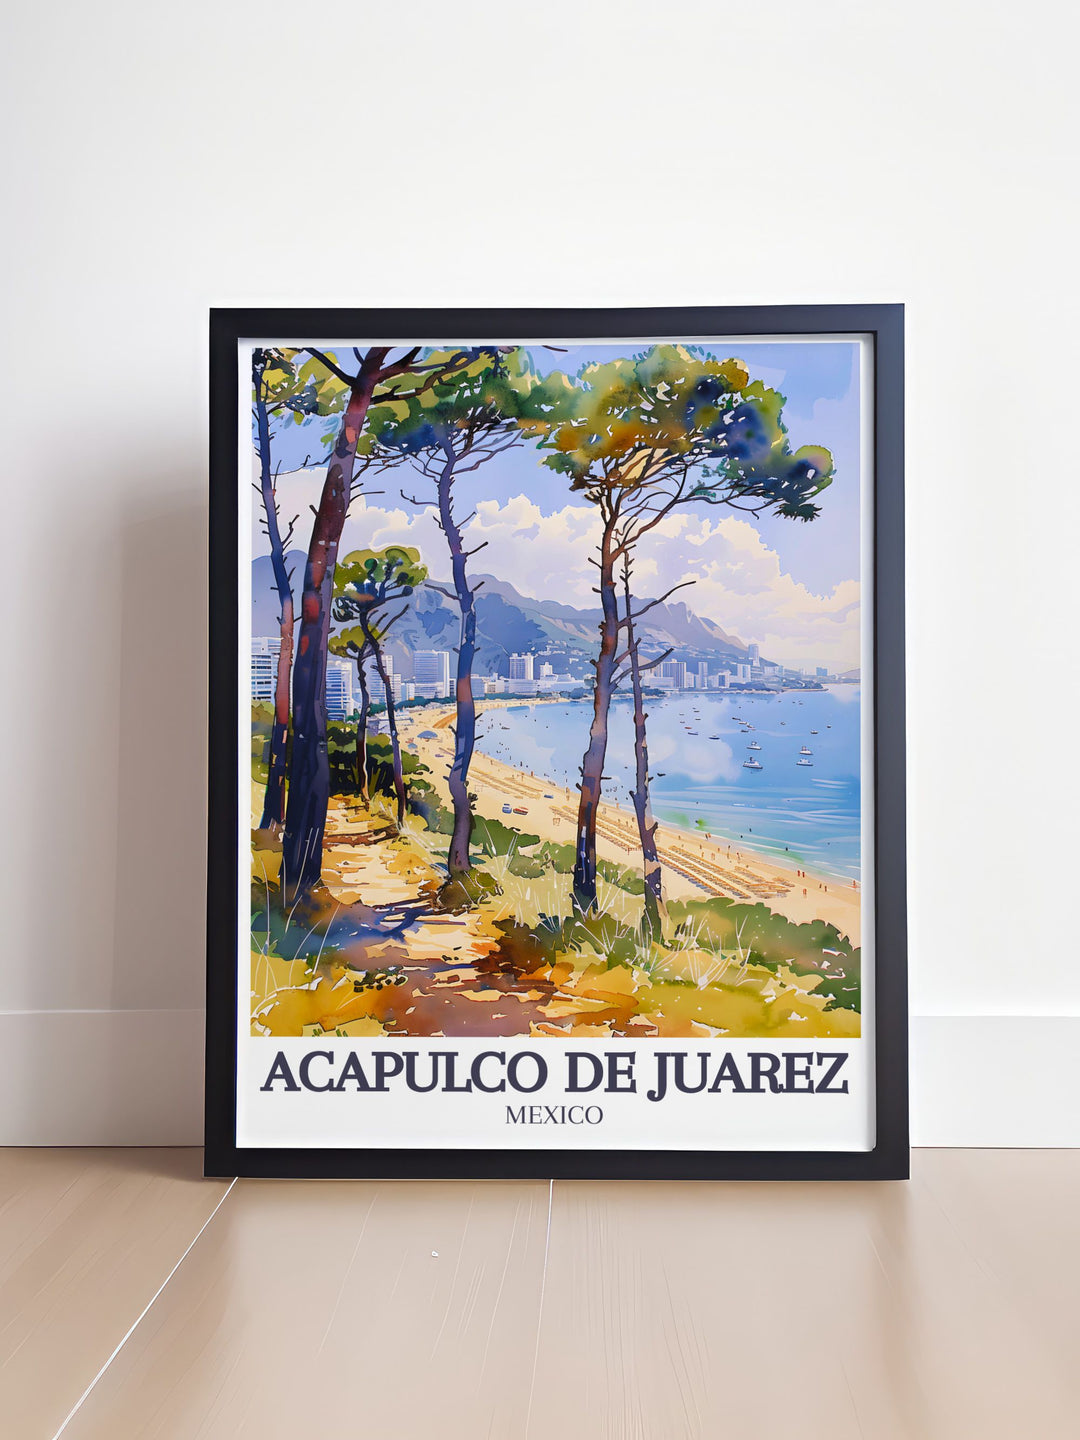 Acapulco Bays serene waters and stunning sunsets are beautifully illustrated in this poster, inviting viewers to explore the beauty of Acapulco de Juárez.